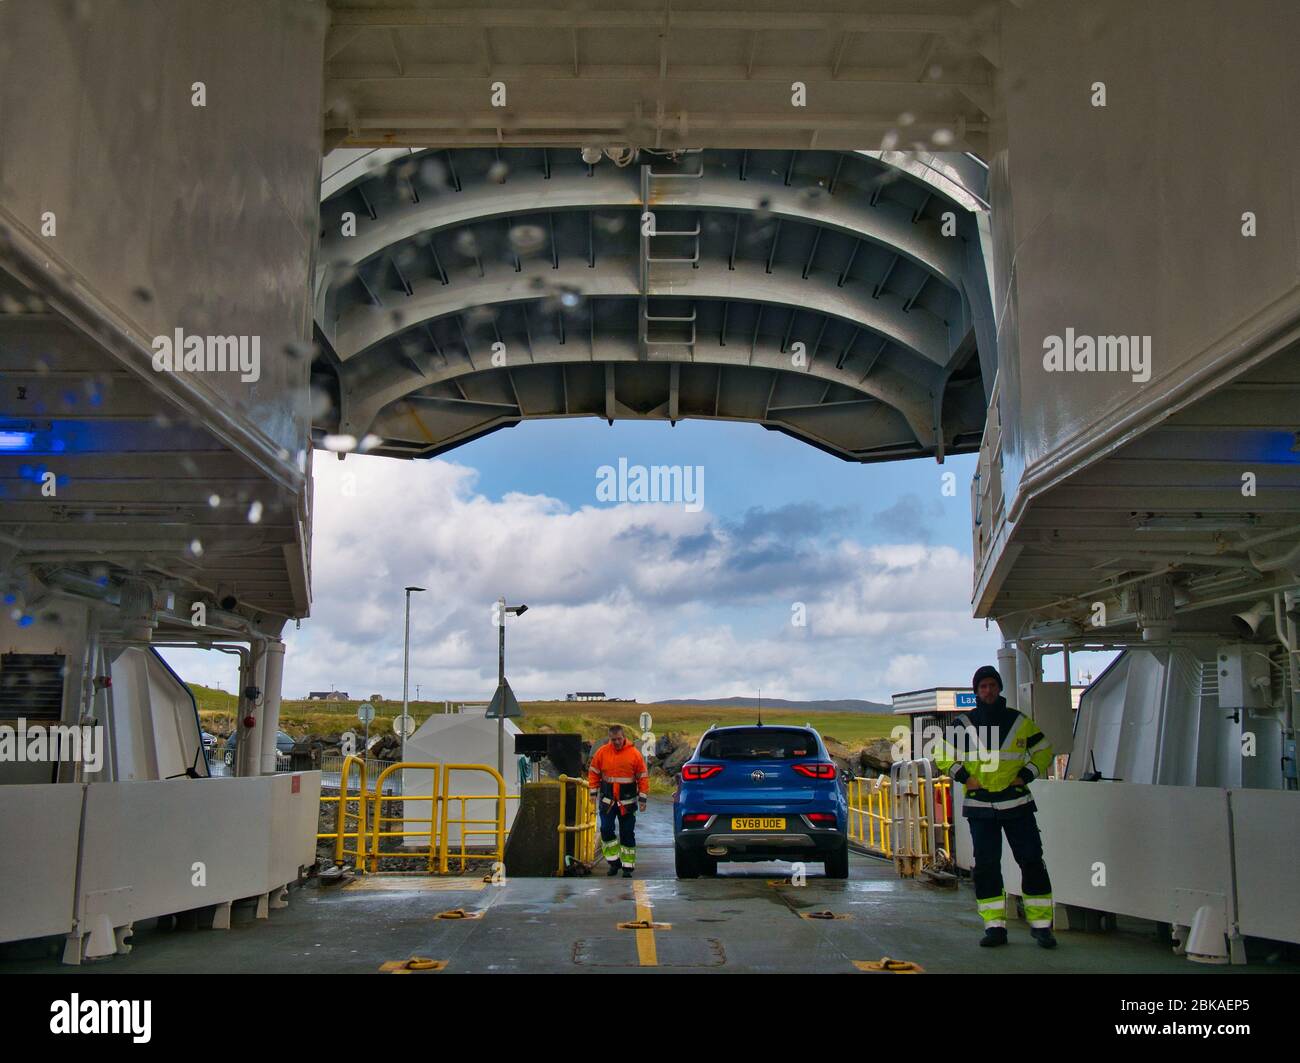 With the ship's bow door raised and raindrops visible on the windscreen, a vehicle prepares to disembark the car deck of a roll on/roll off car ferry Stock Photo